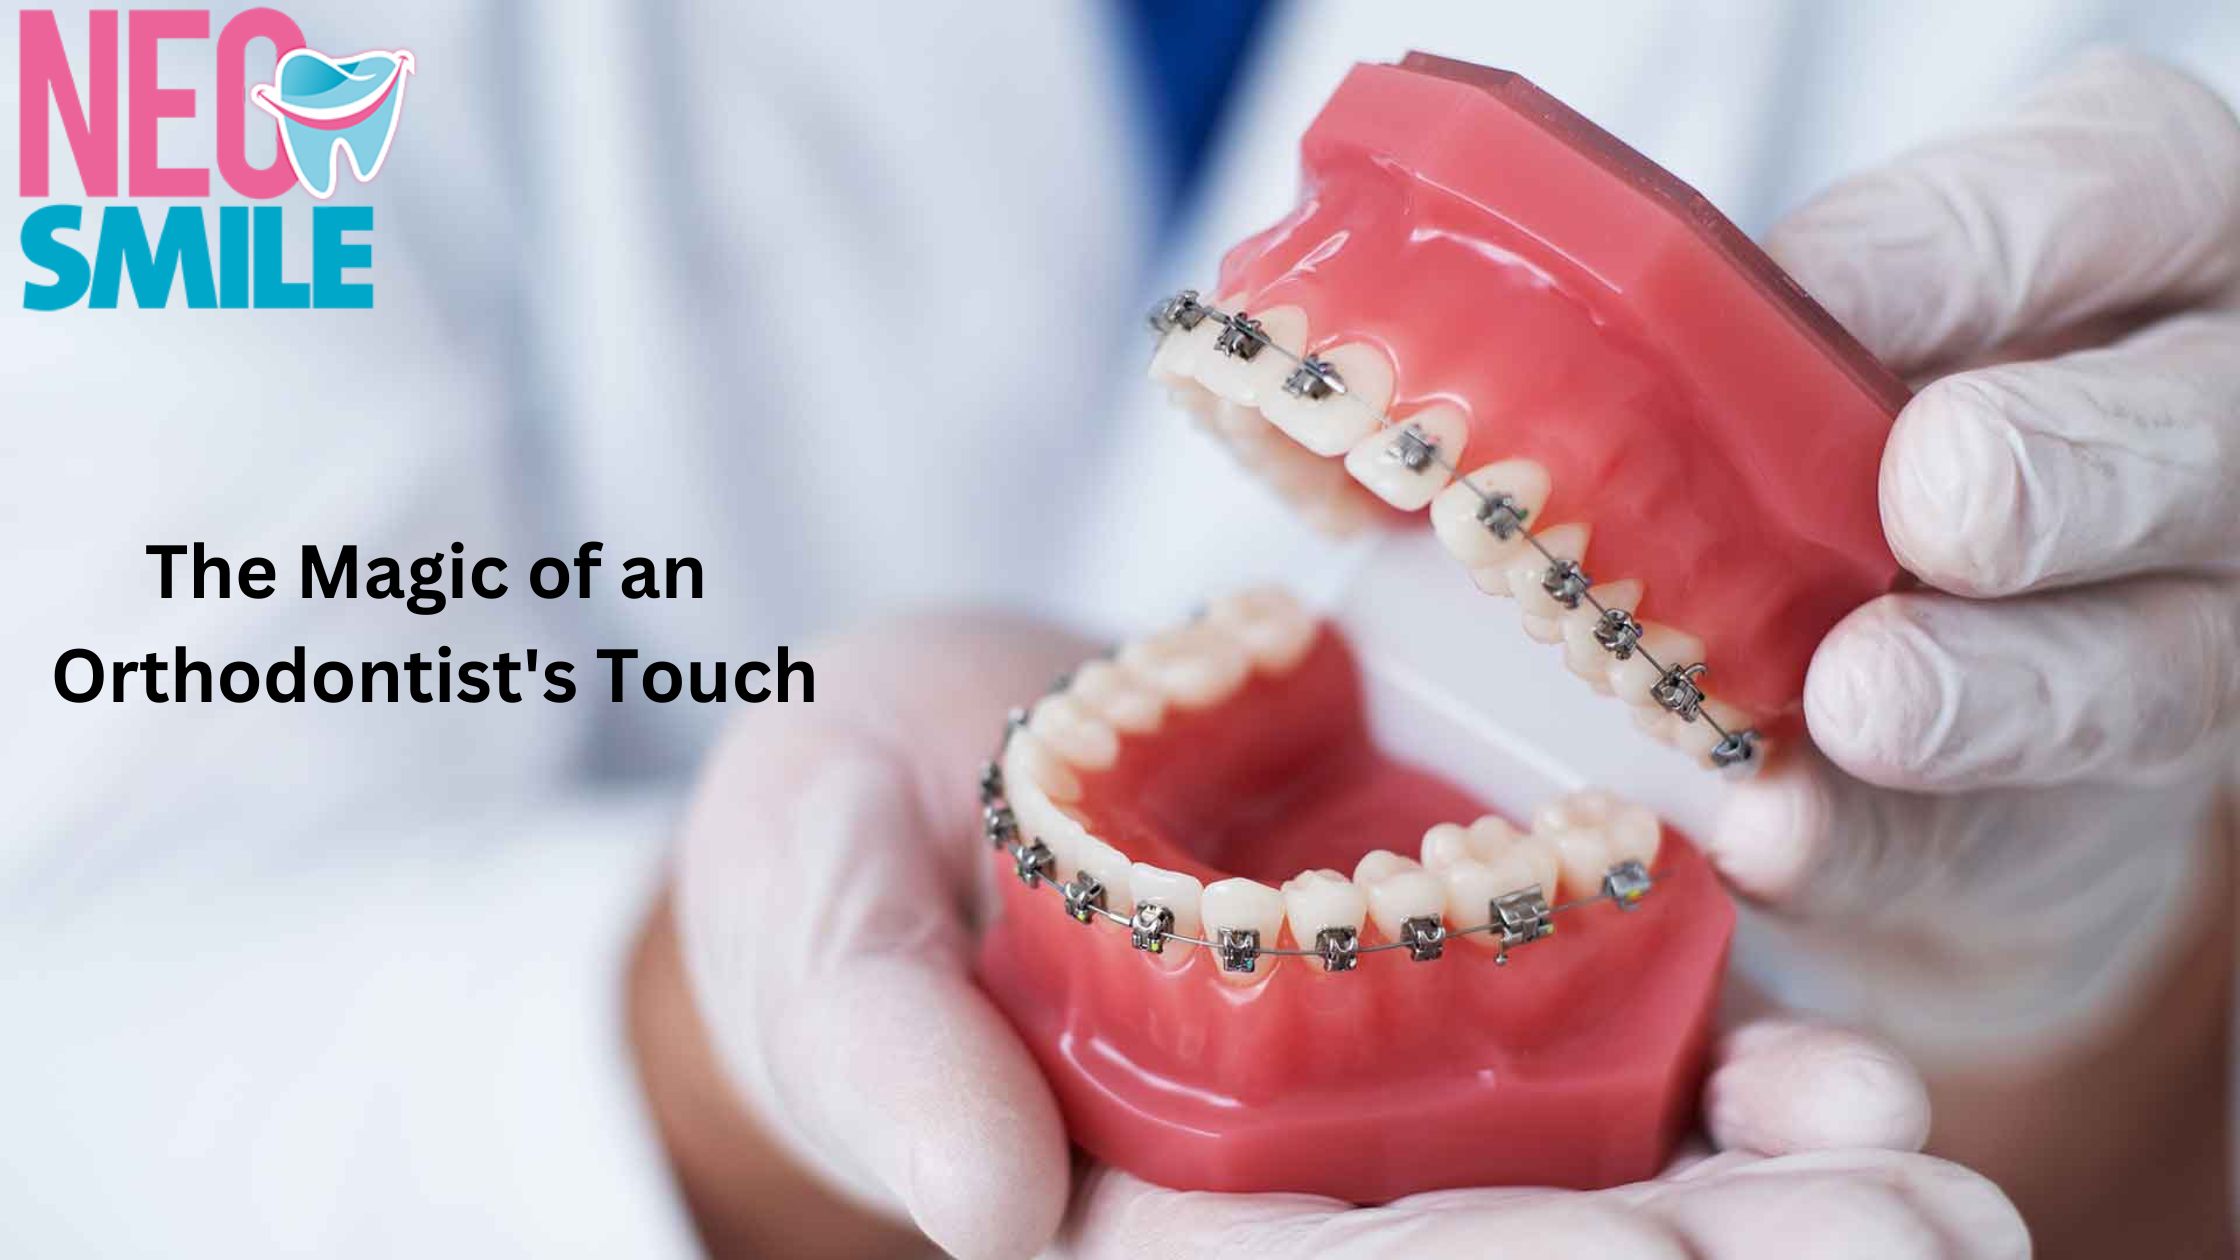 The Magic of an Orthodontist's Touch